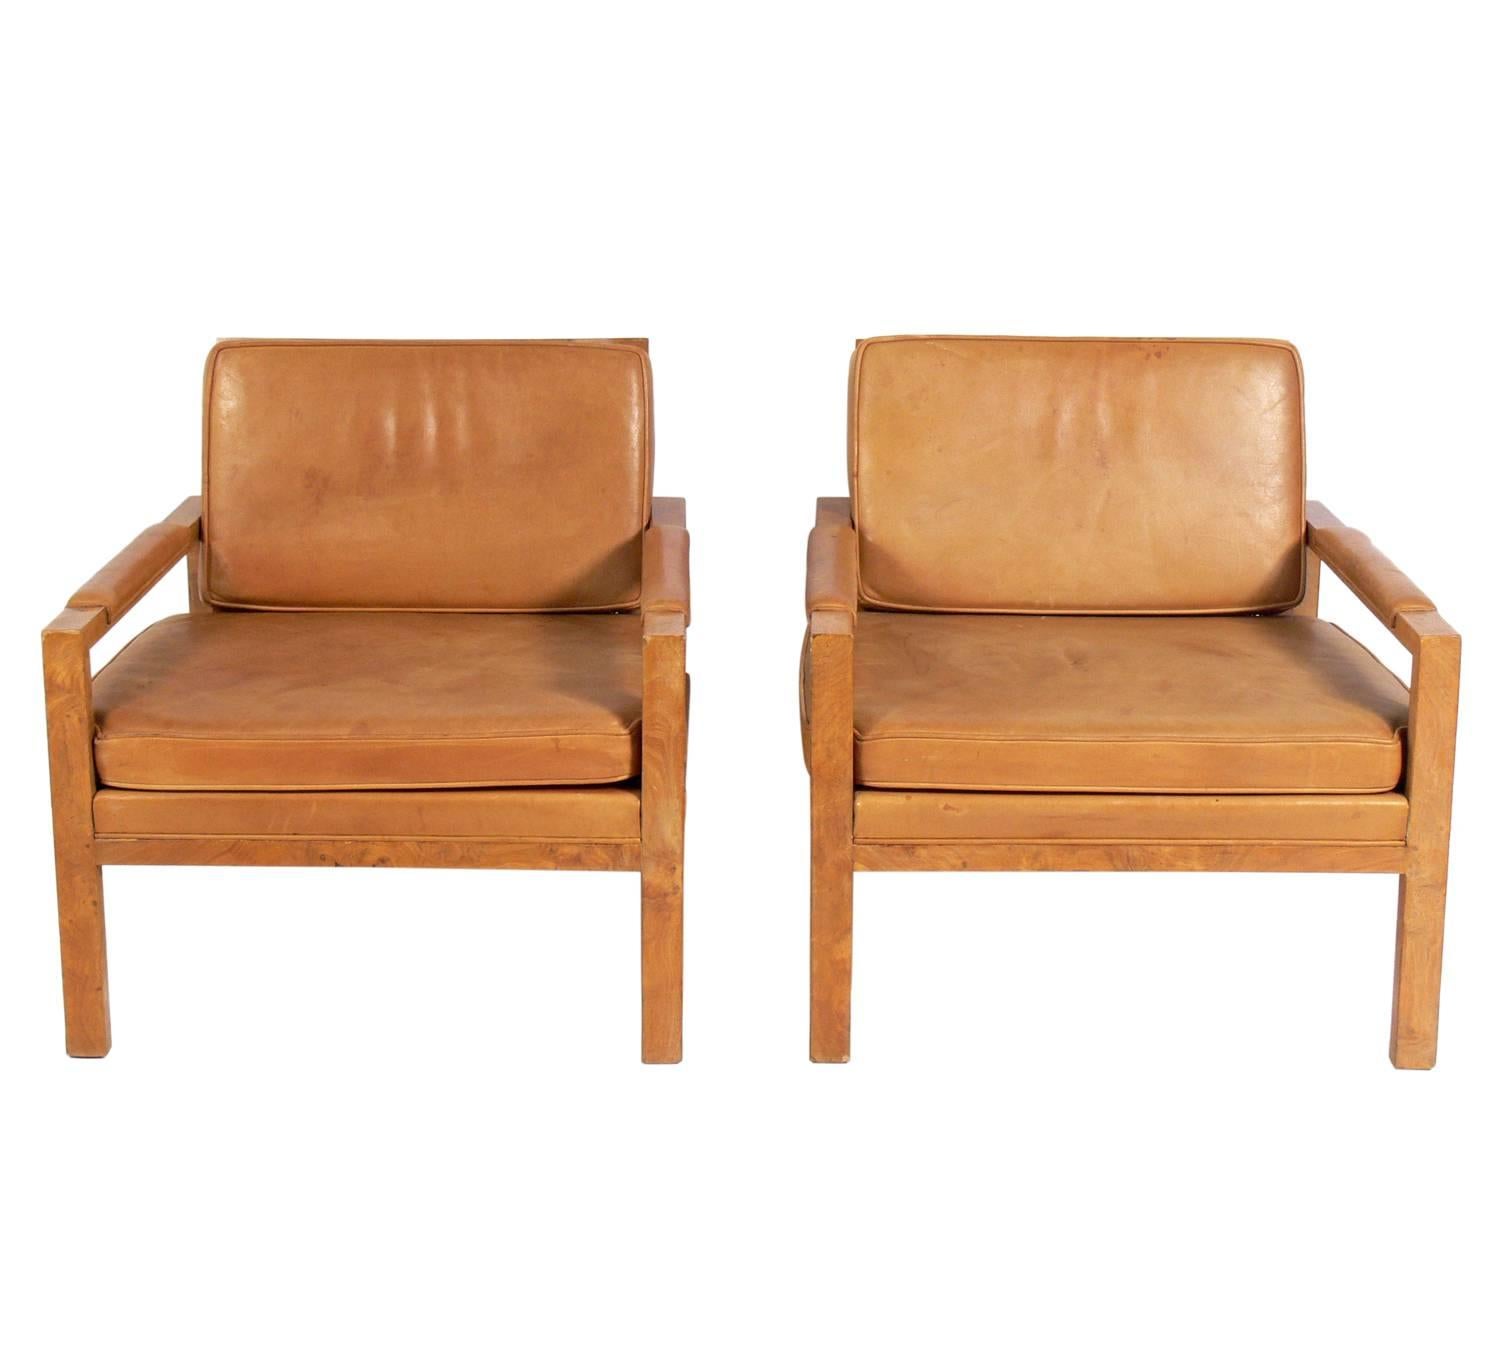 Mid-Century Modern Pair of Caned Back Burl Wood Lounge Chairs in Original Saddle Leather